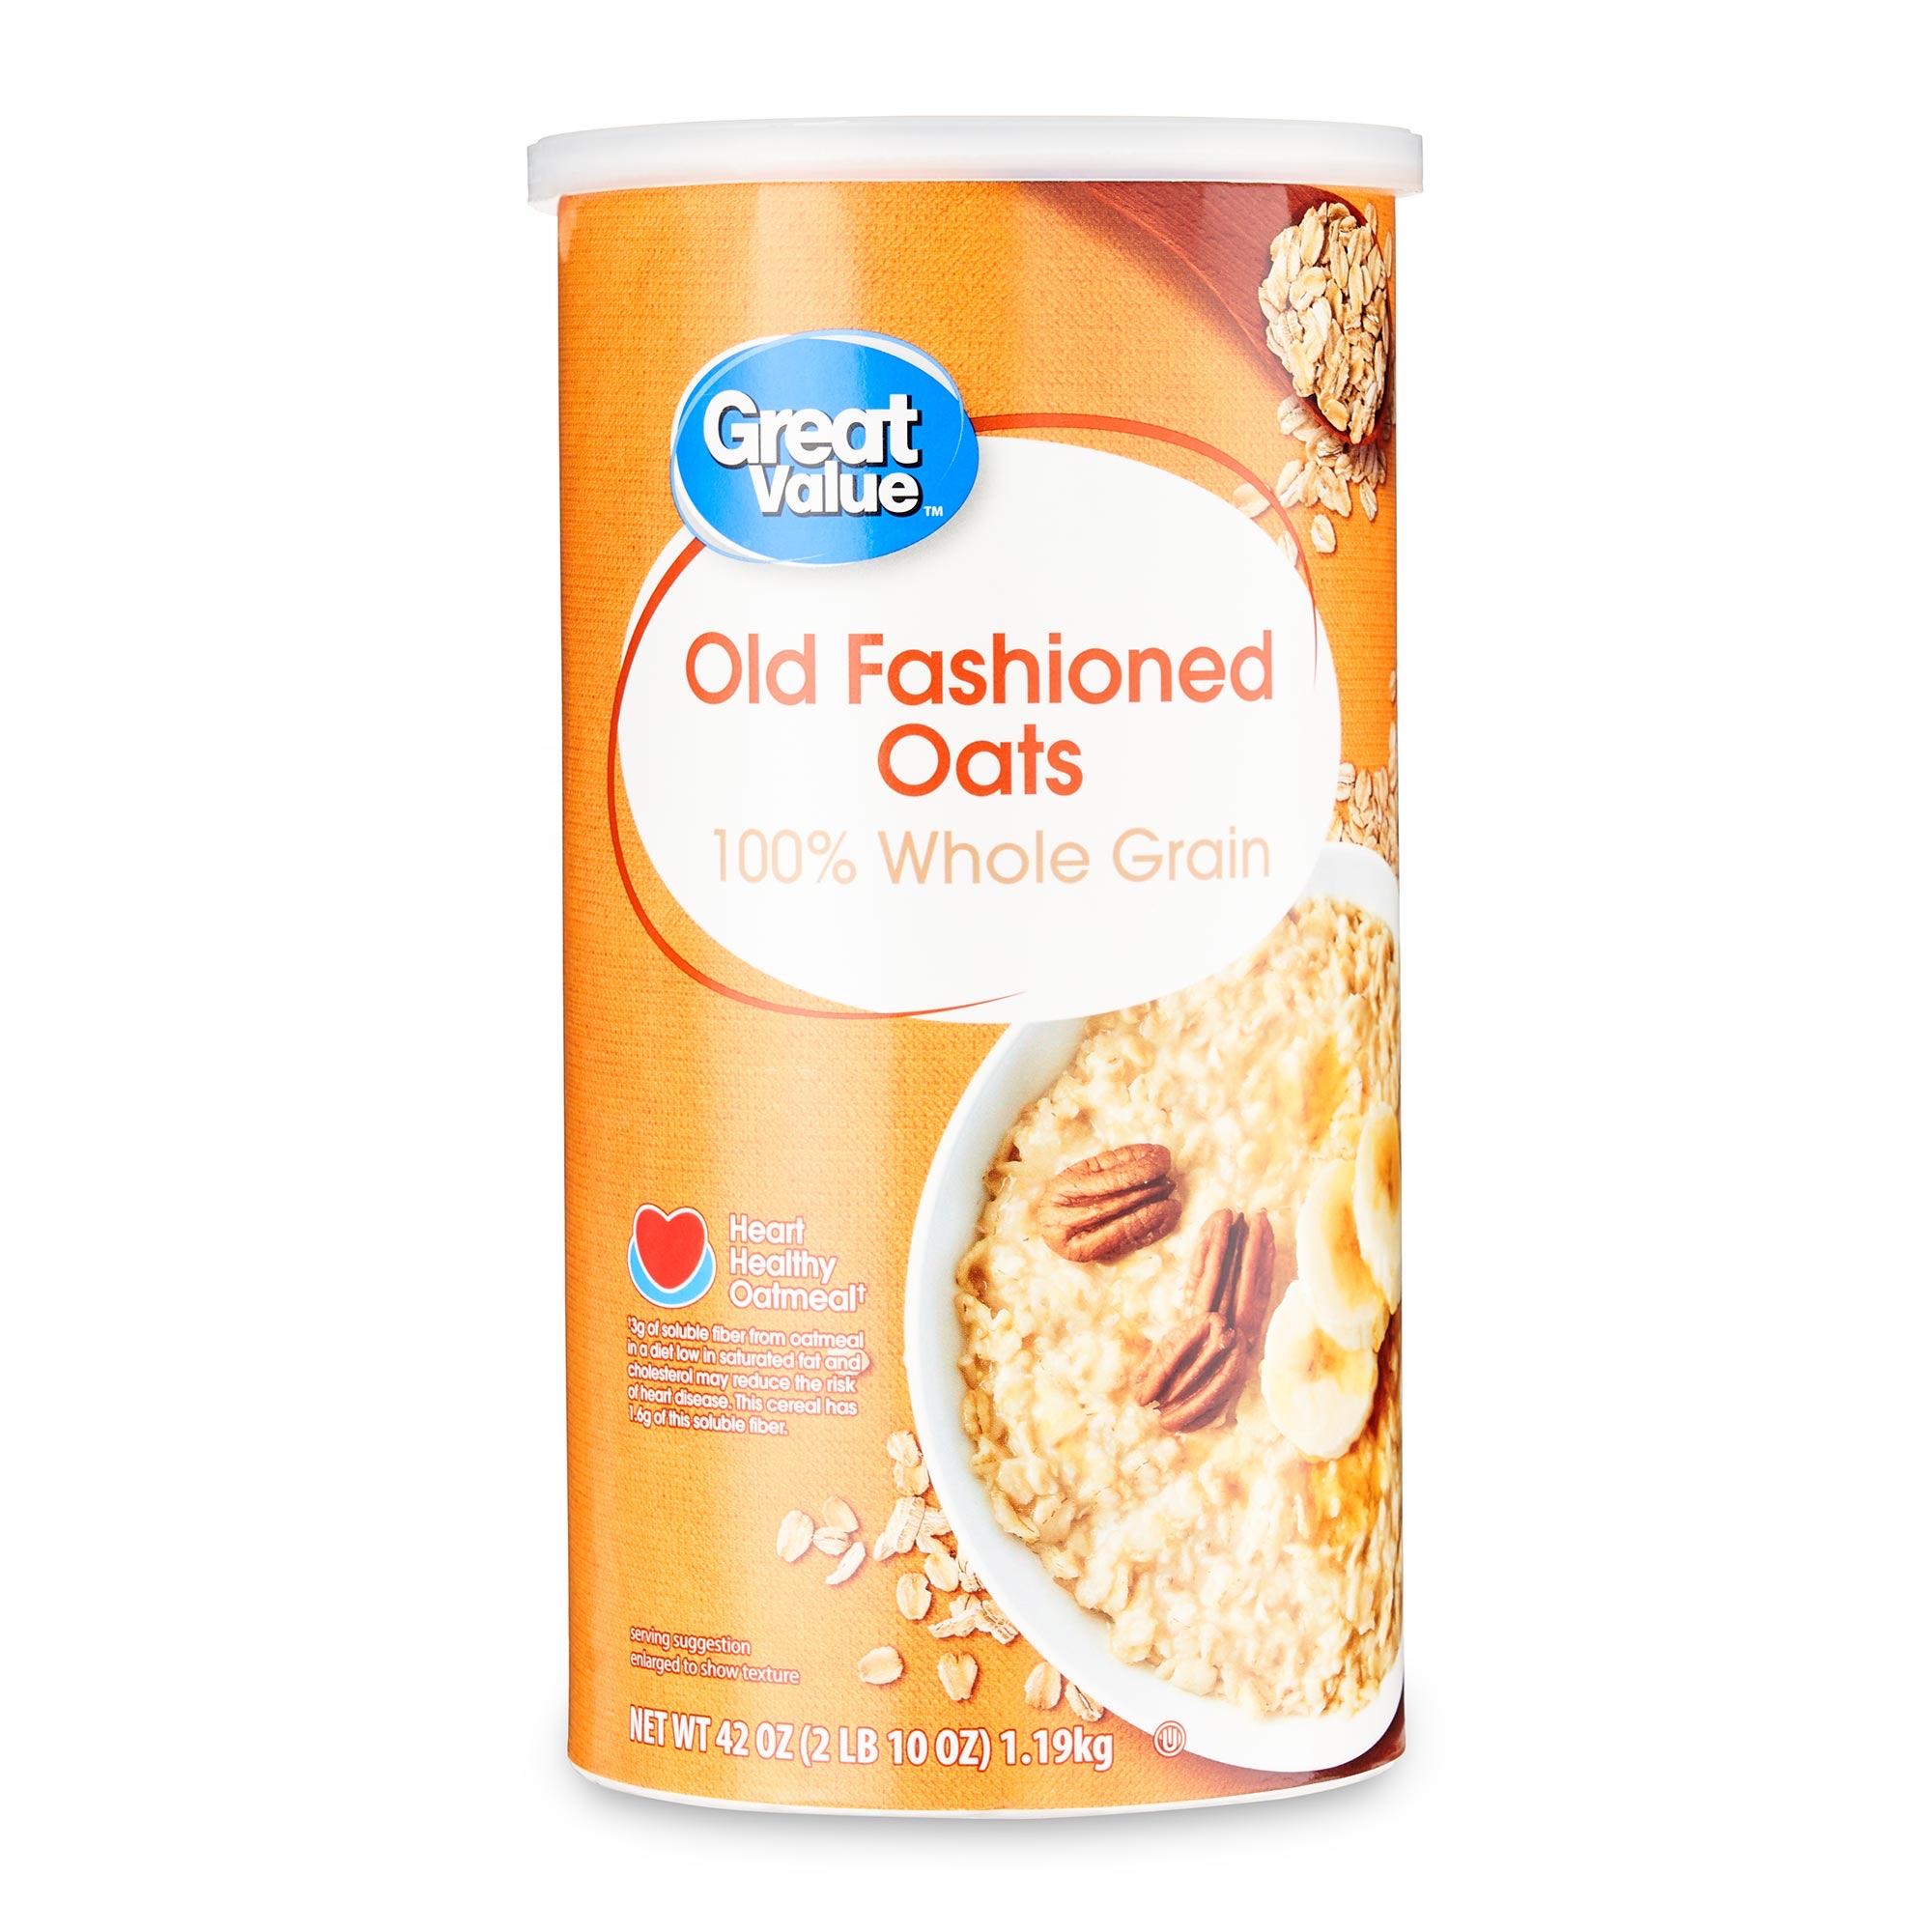 Great Value 100% Whole Grain Old Fashioned Oats, 42 oz - image 1 of 8